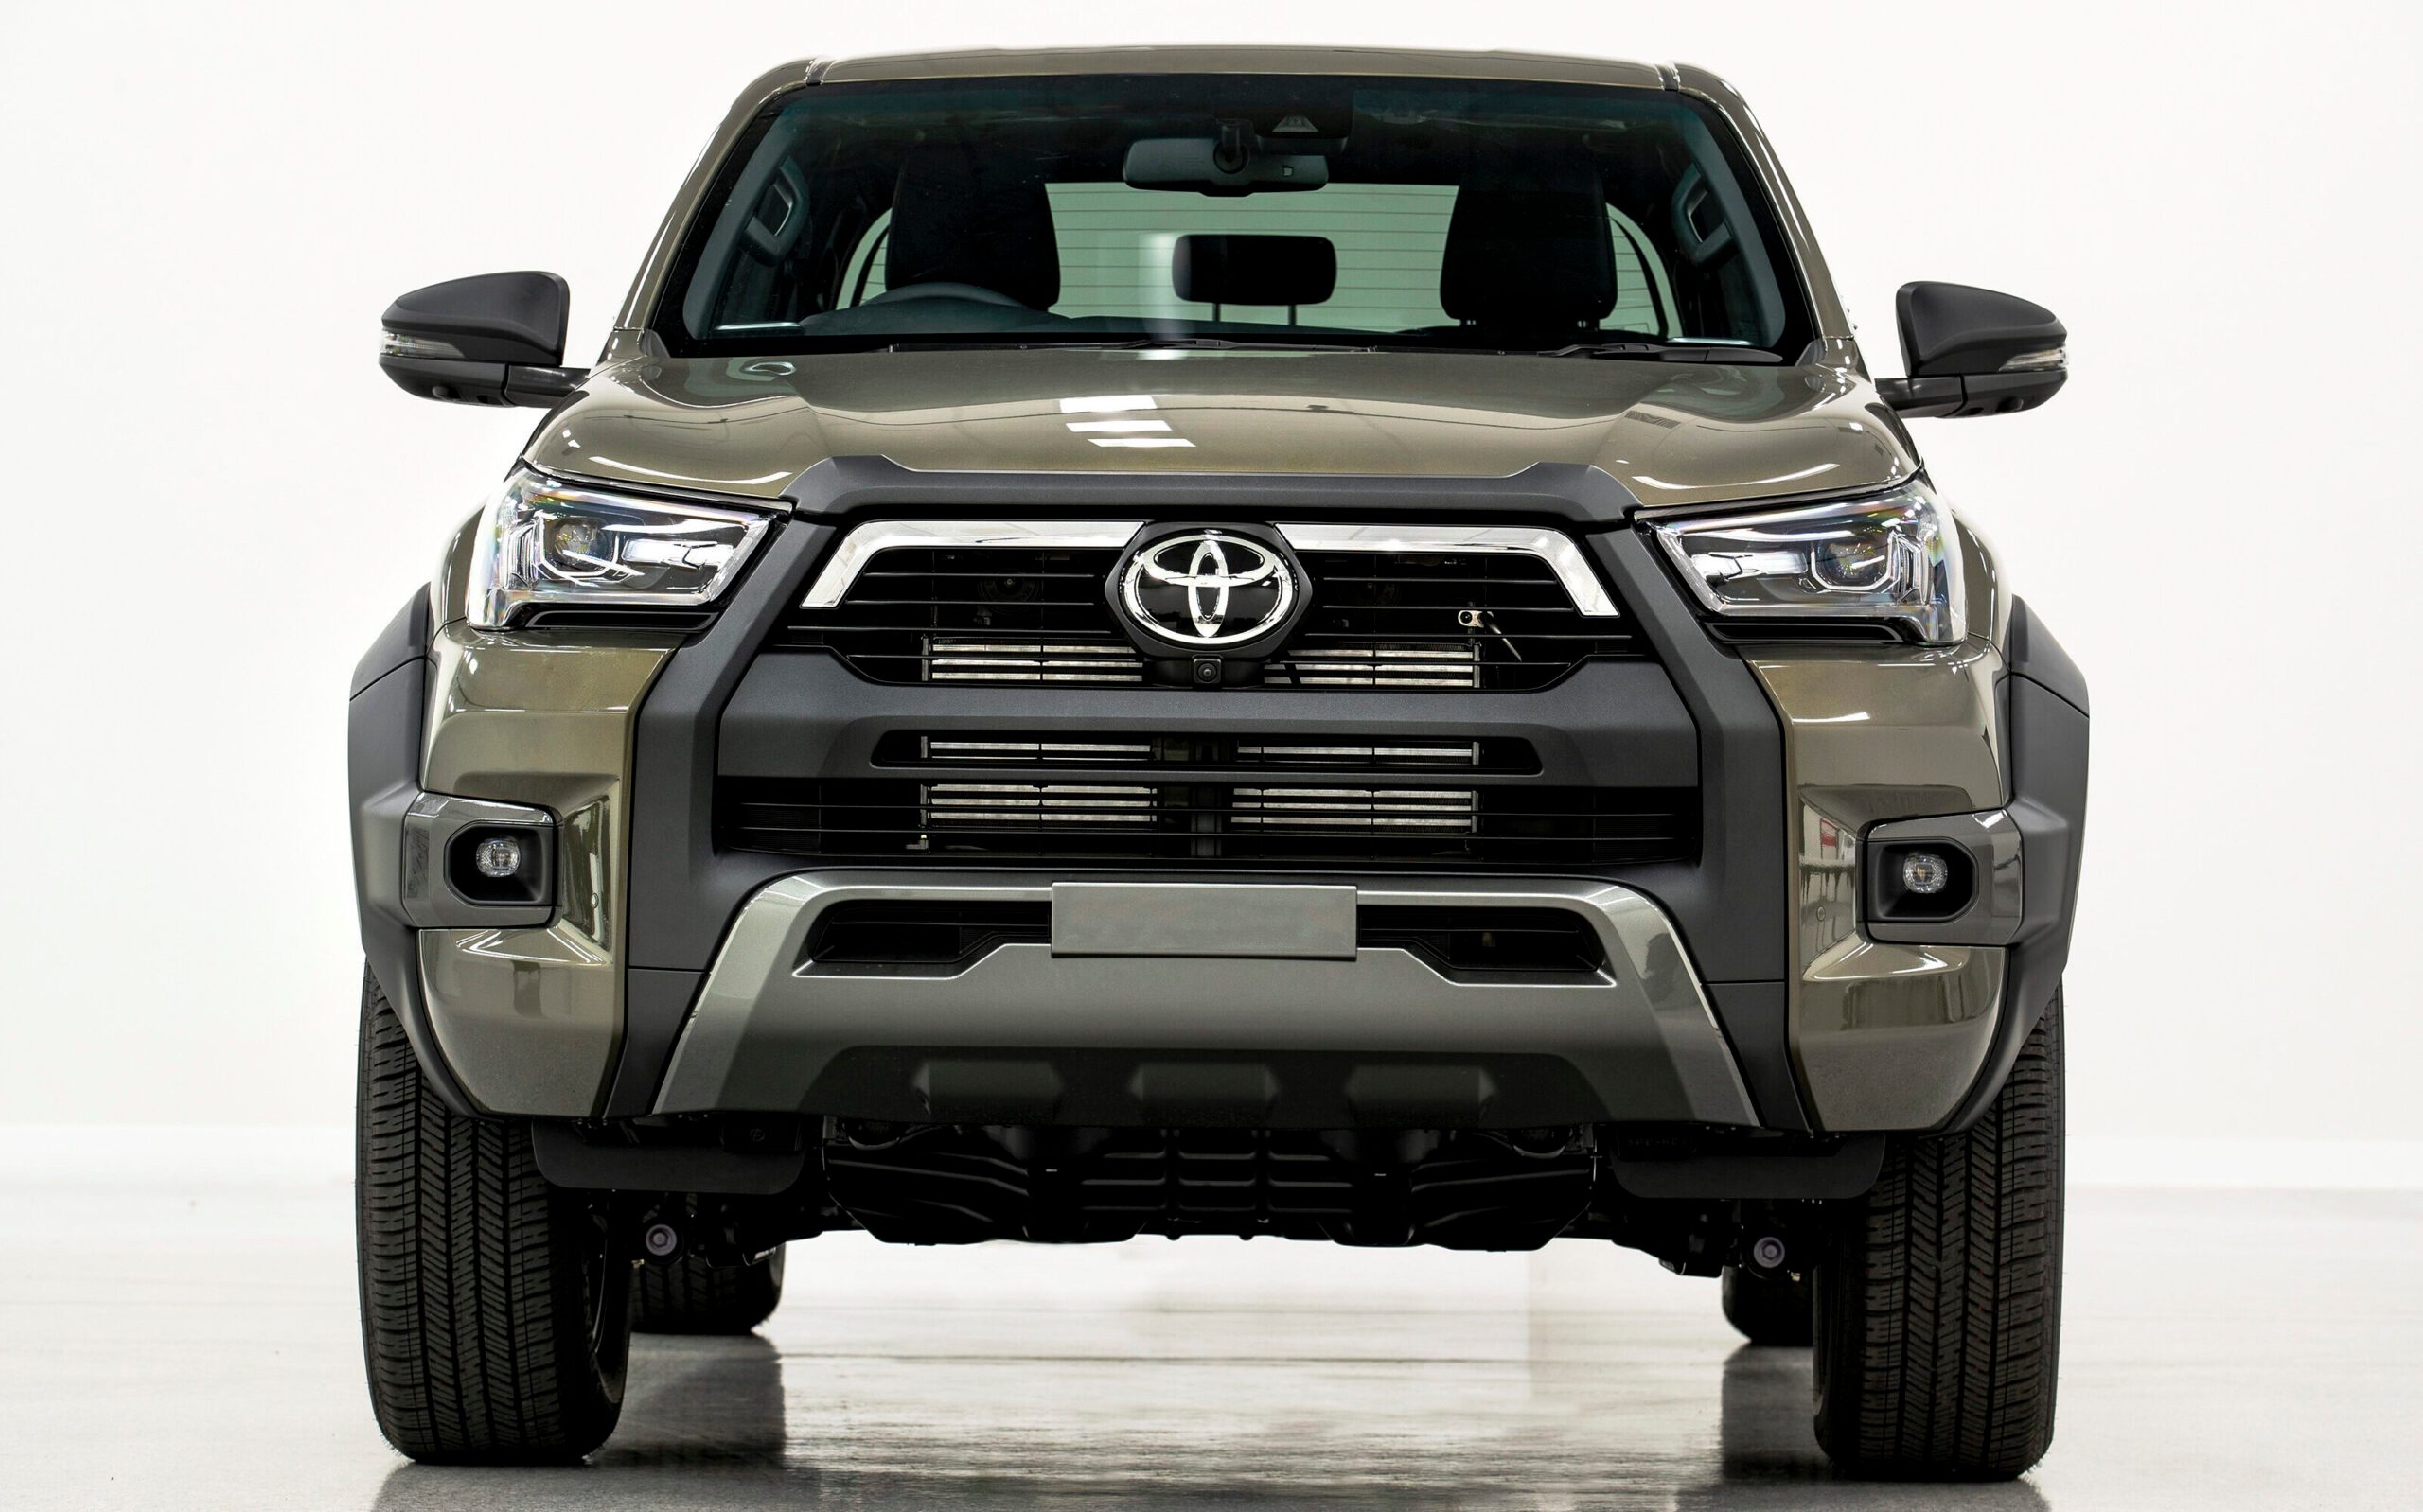 Toyota Hilux 4WD SR5 Cruiser front